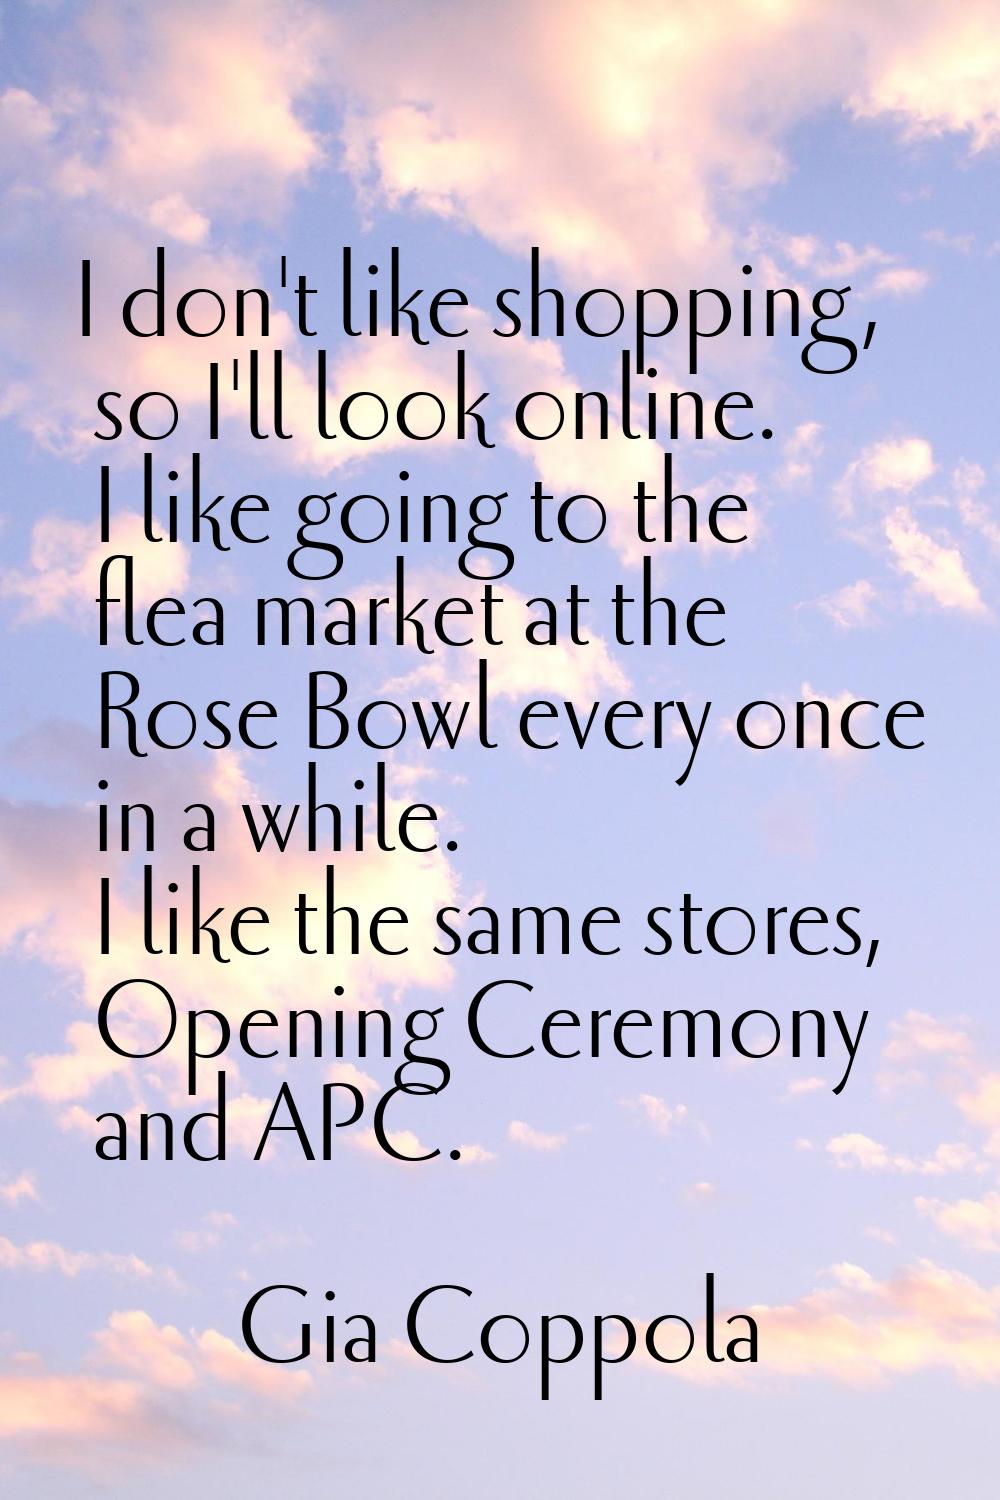 I don't like shopping, so I'll look online. I like going to the flea market at the Rose Bowl every 